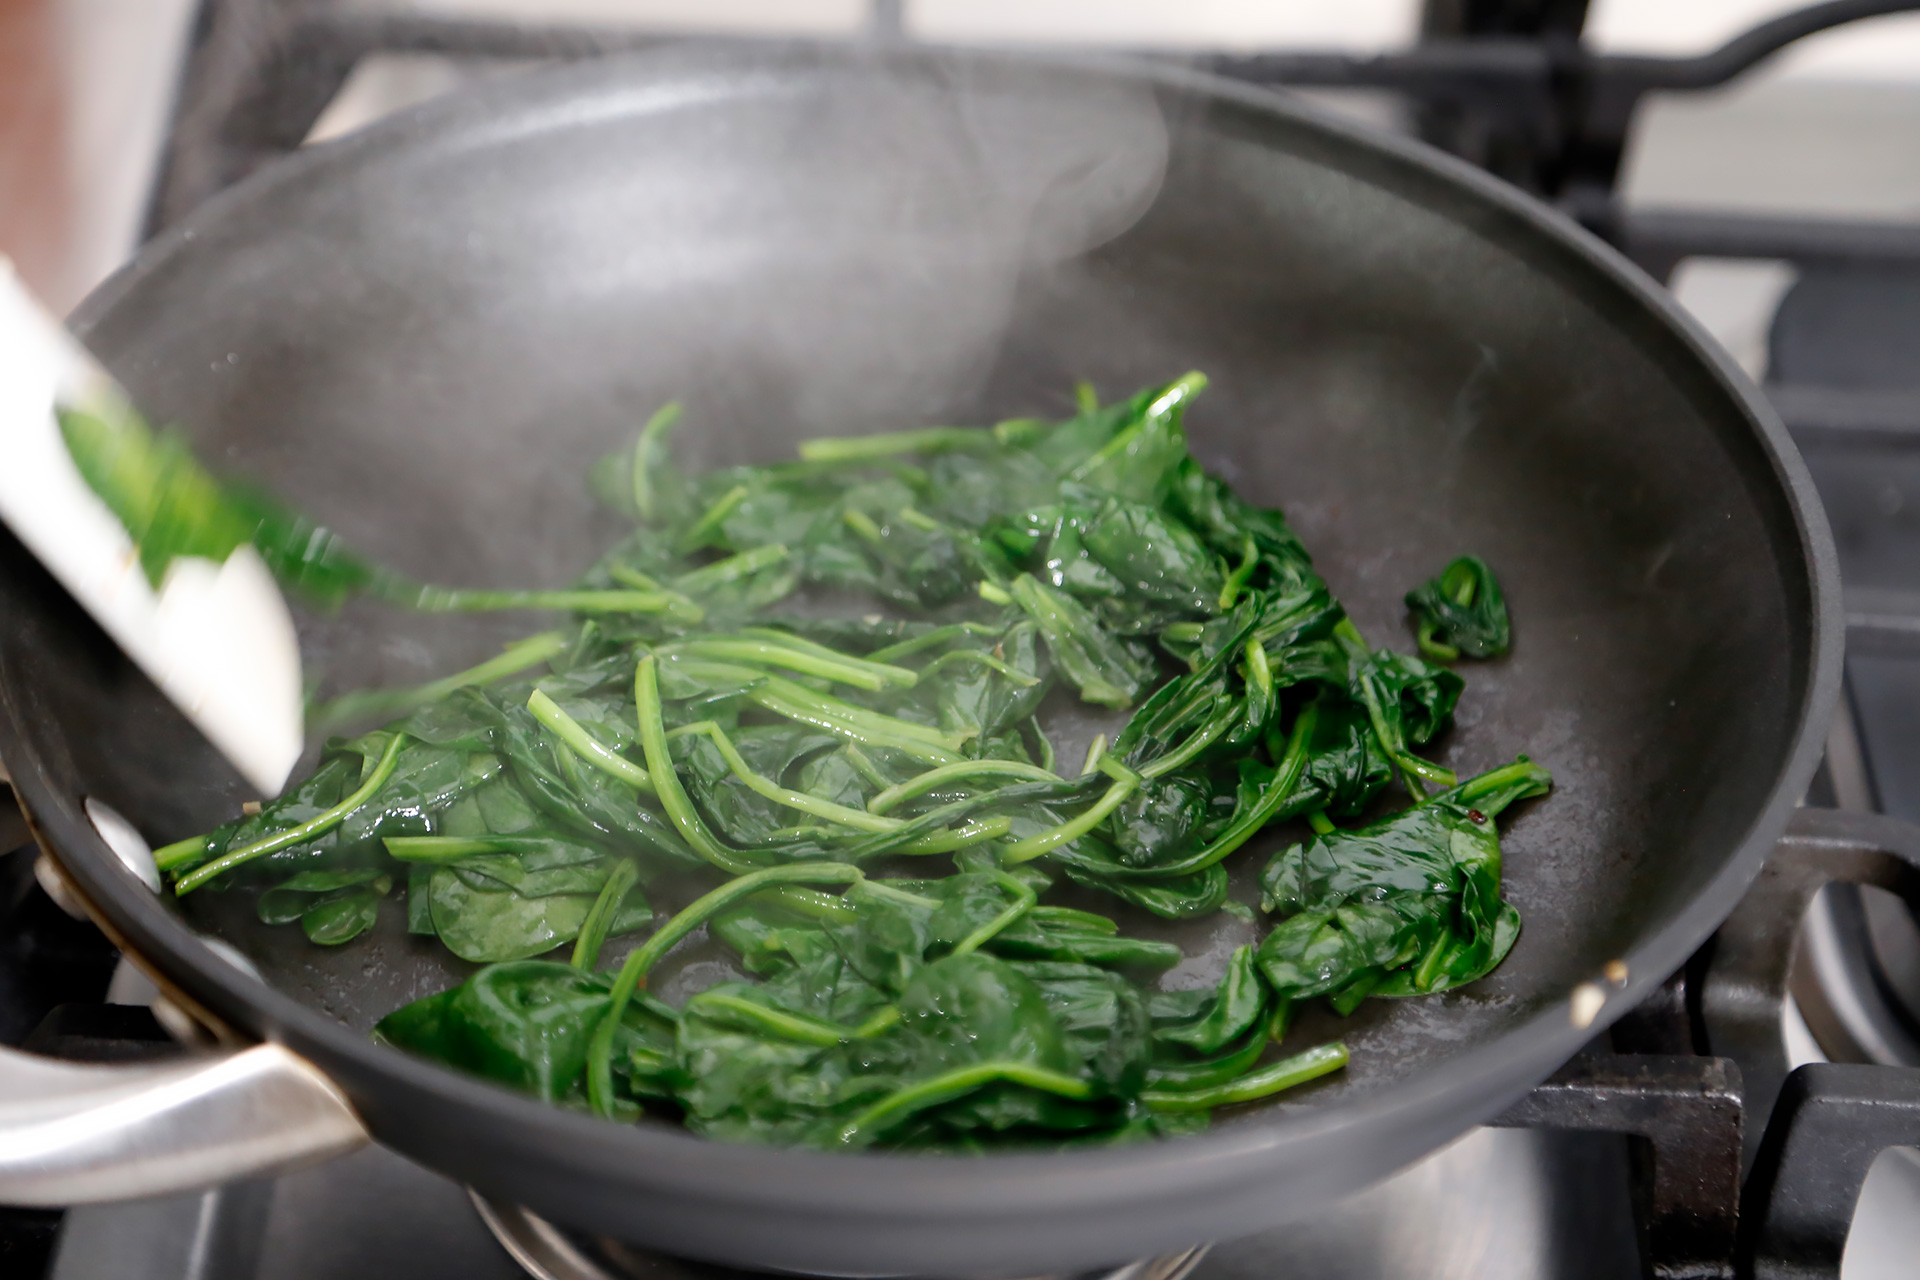 Add the spinach. Cook just until wilted, then transfer to a colander.